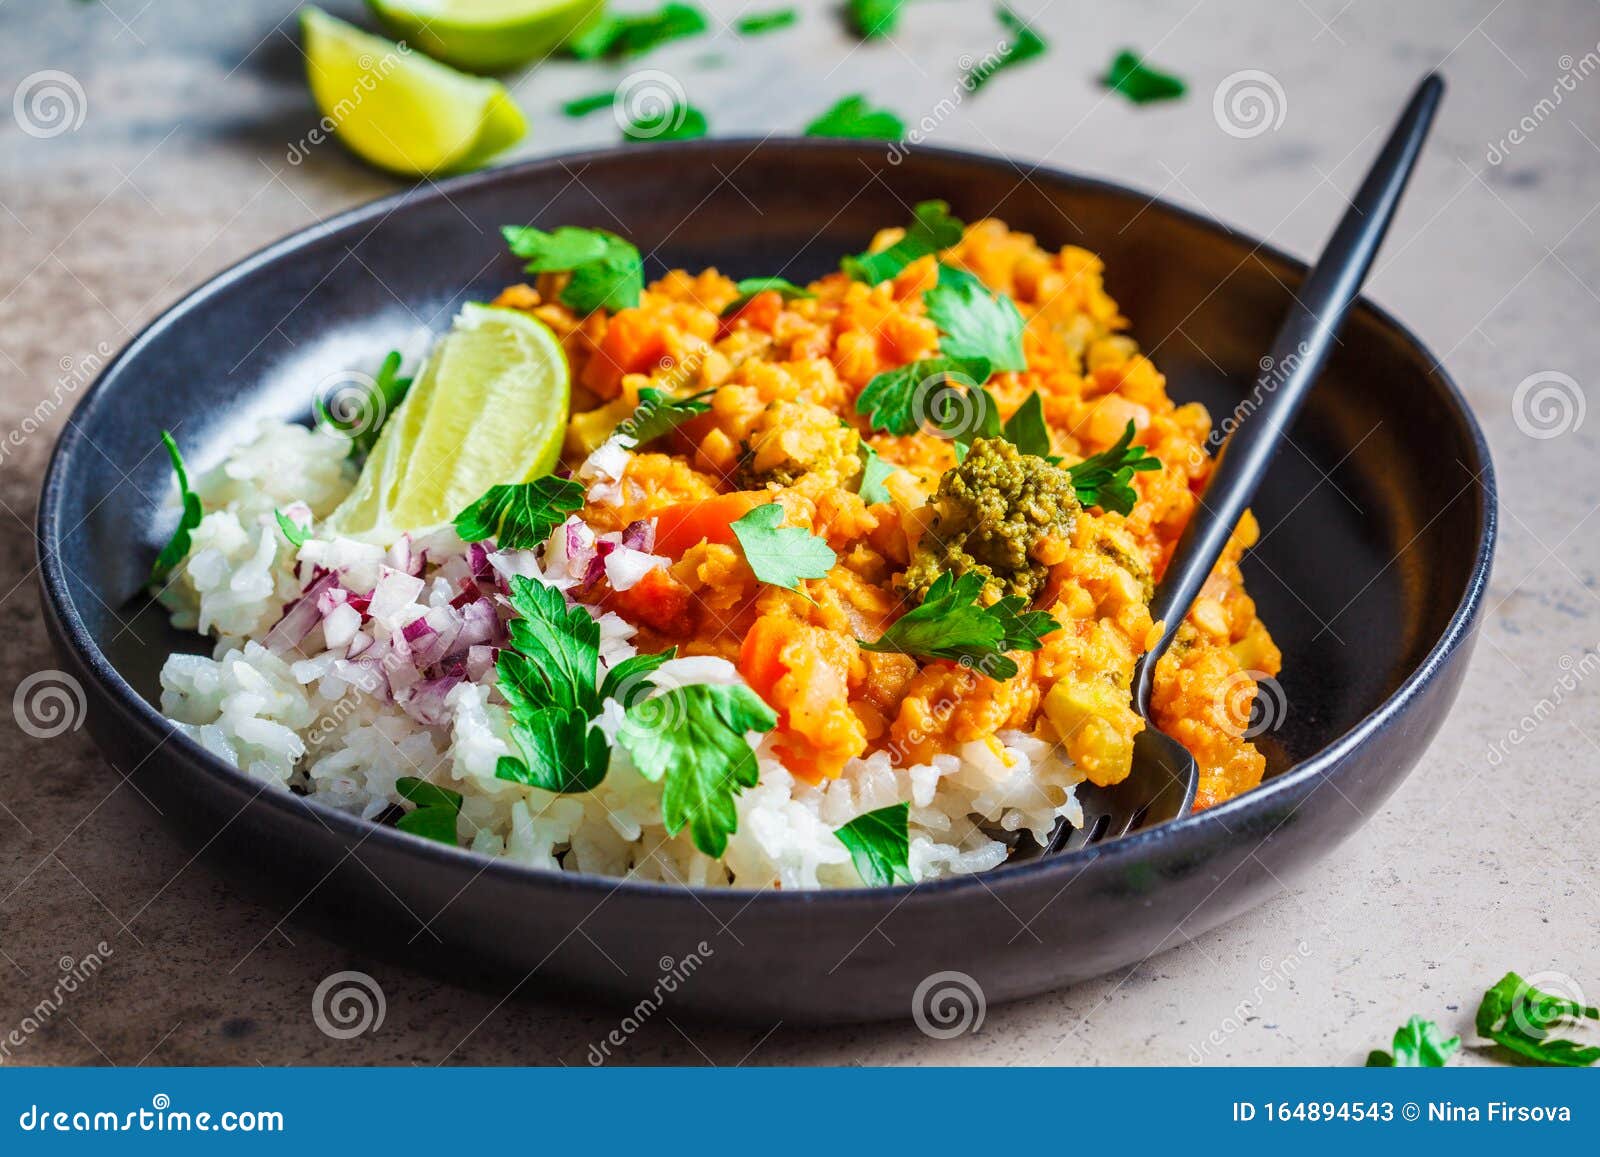 vegetarian lentil curry with rice in black plate. healthy vegan food concept